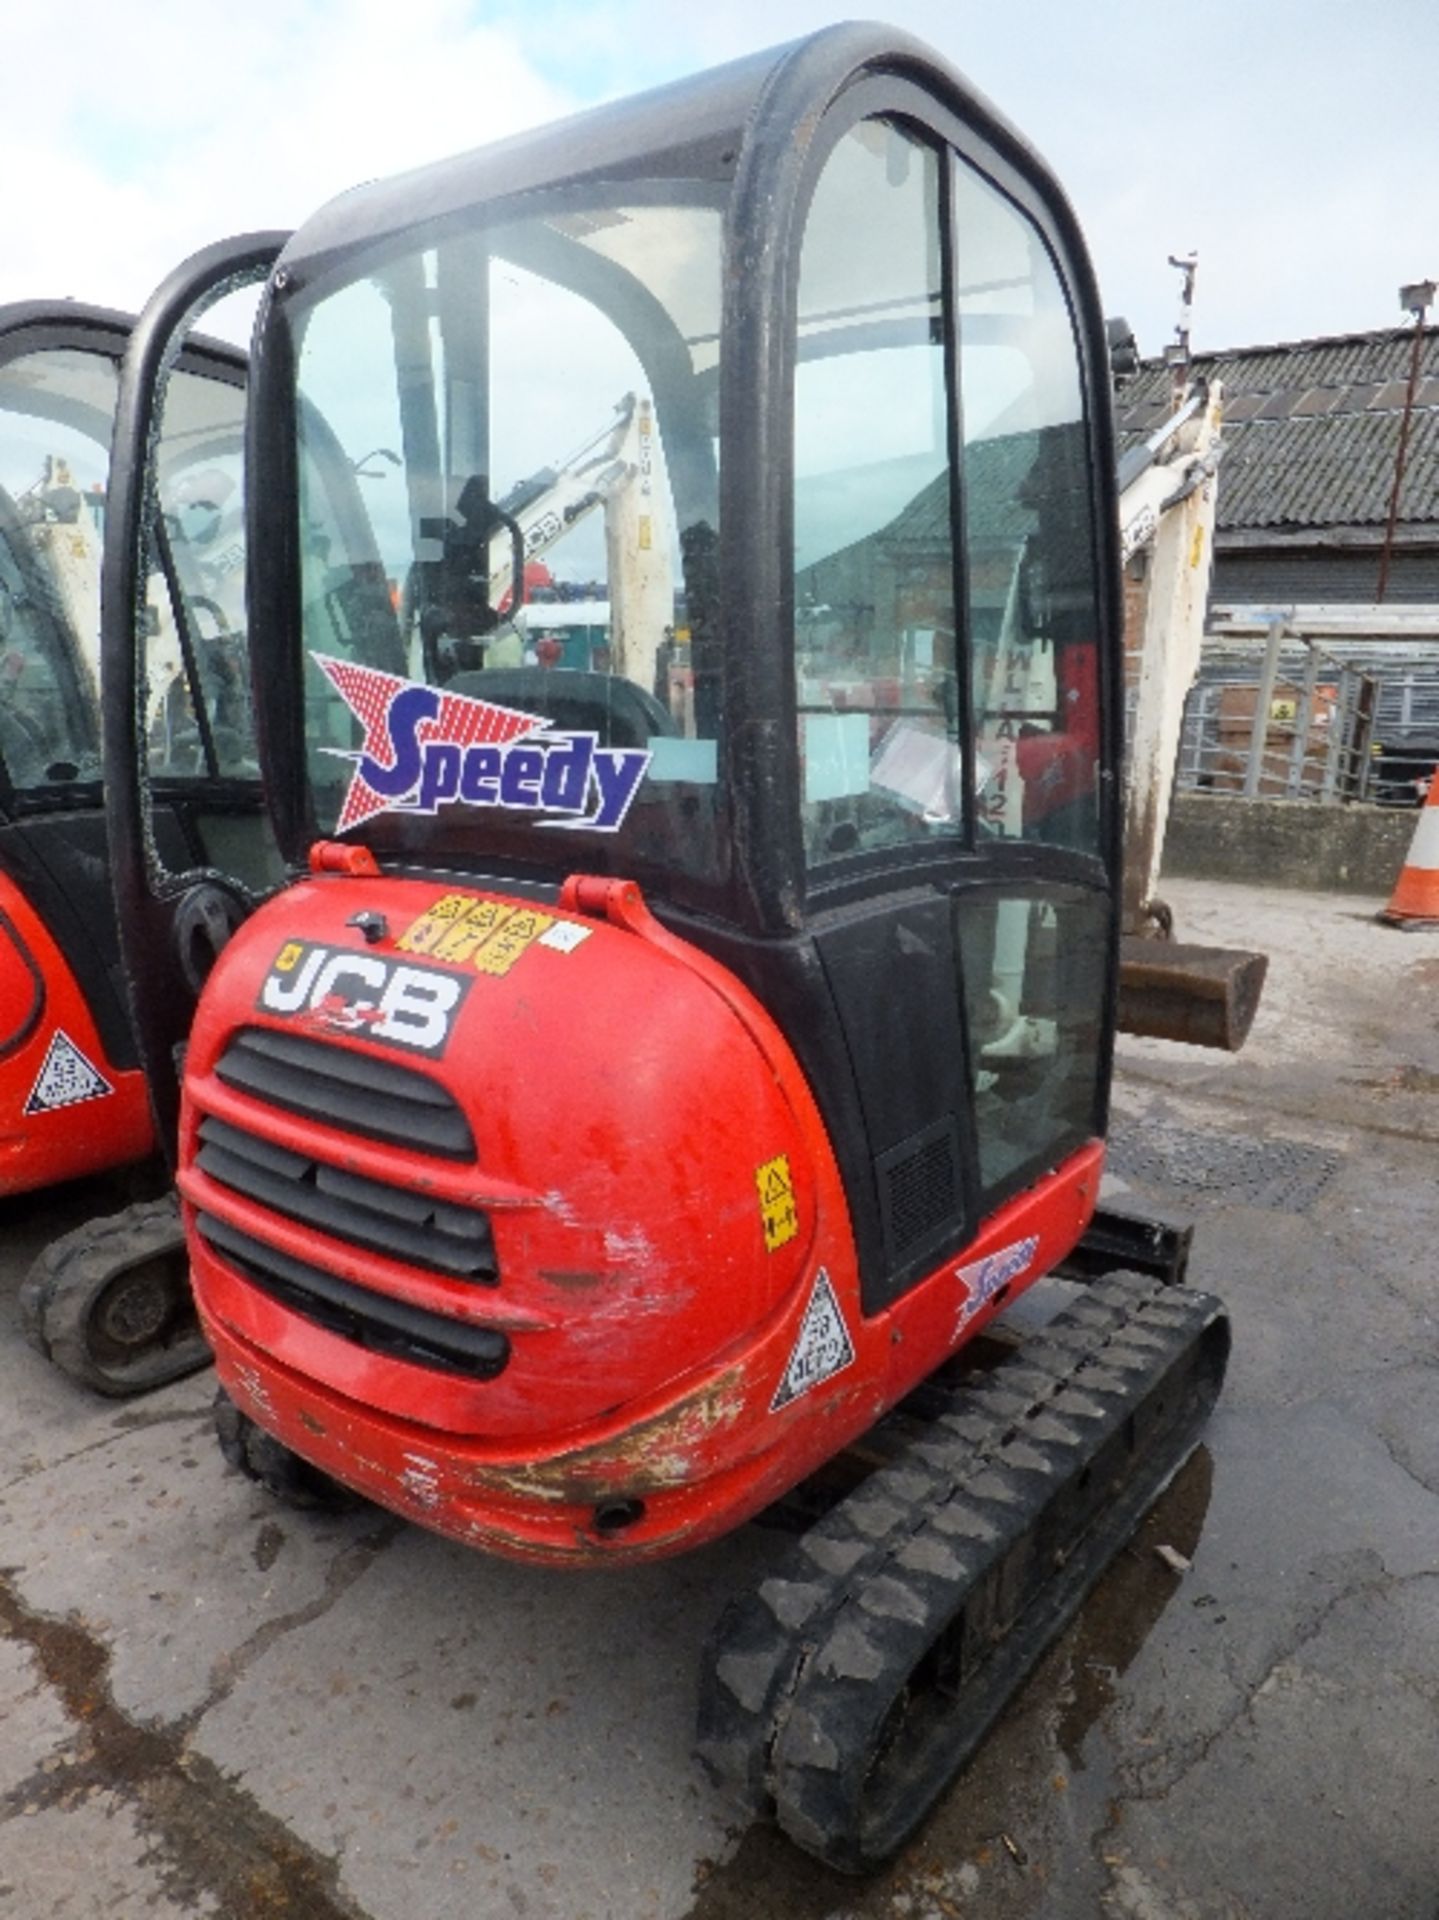 JCB 801.8 CTS mini digger (2011) 941 hrs WLCA112051861 1 bucket, expanding tracks, RDD, coded key - Image 10 of 10